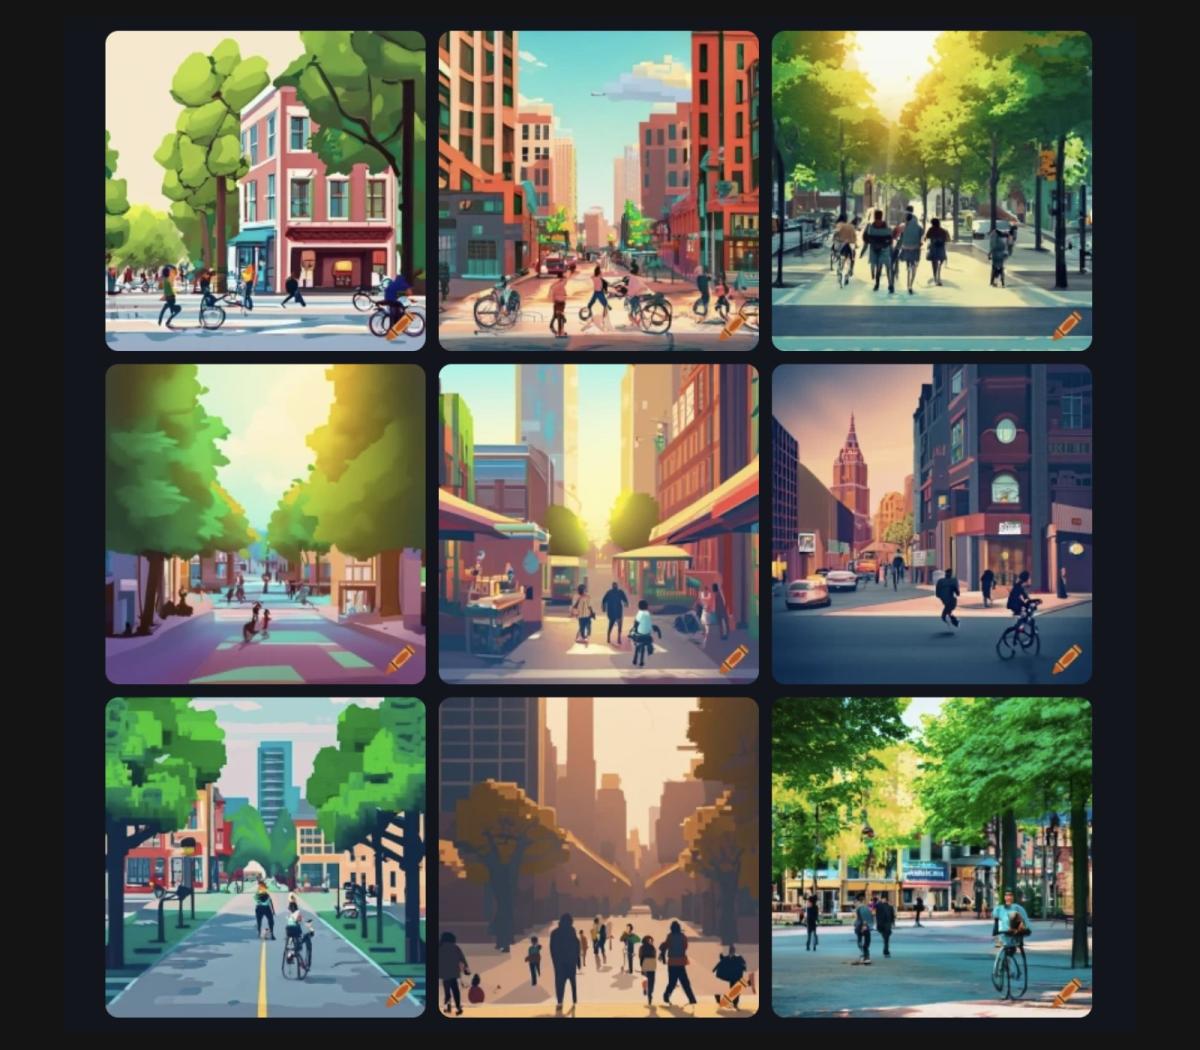 A panel of nine AI-generated illustrations that show city streets with people walking and biking, trees, and storefronts